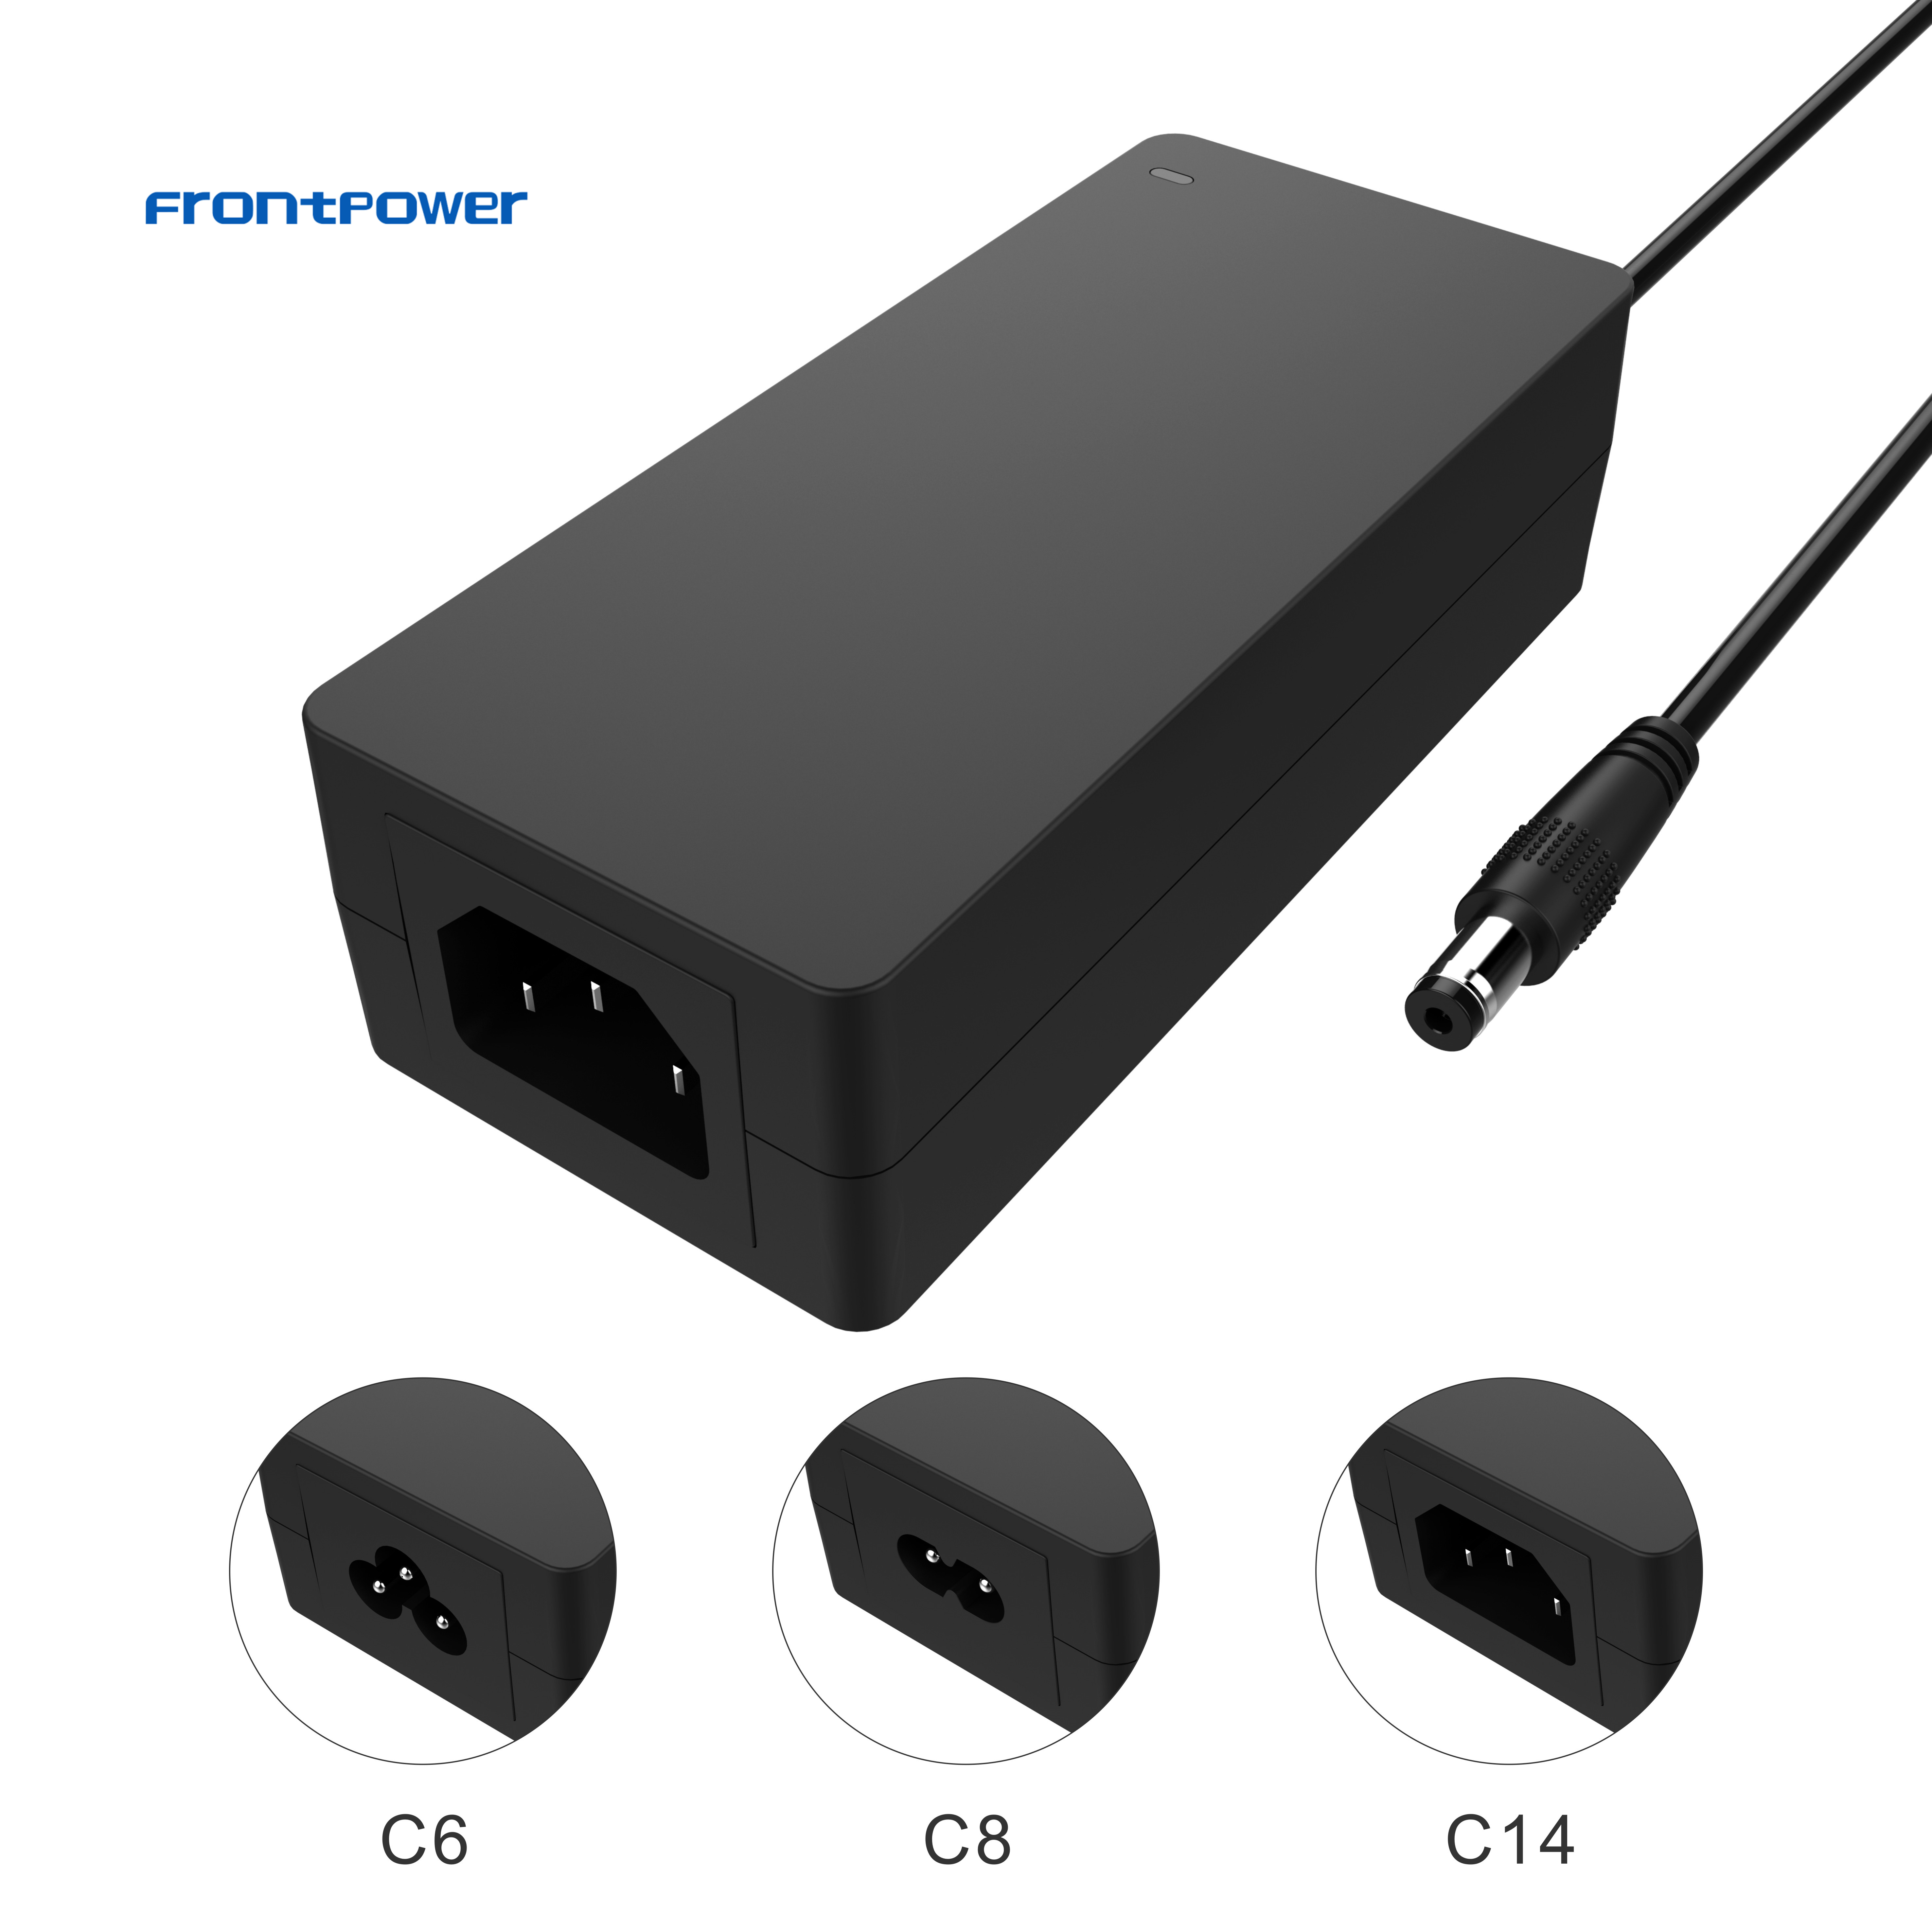 Frontpower UL CE GS UKCA  BIS SAA power adapter 12v 5a 18V 2.5A 19v 3.42a laptop switching adapter